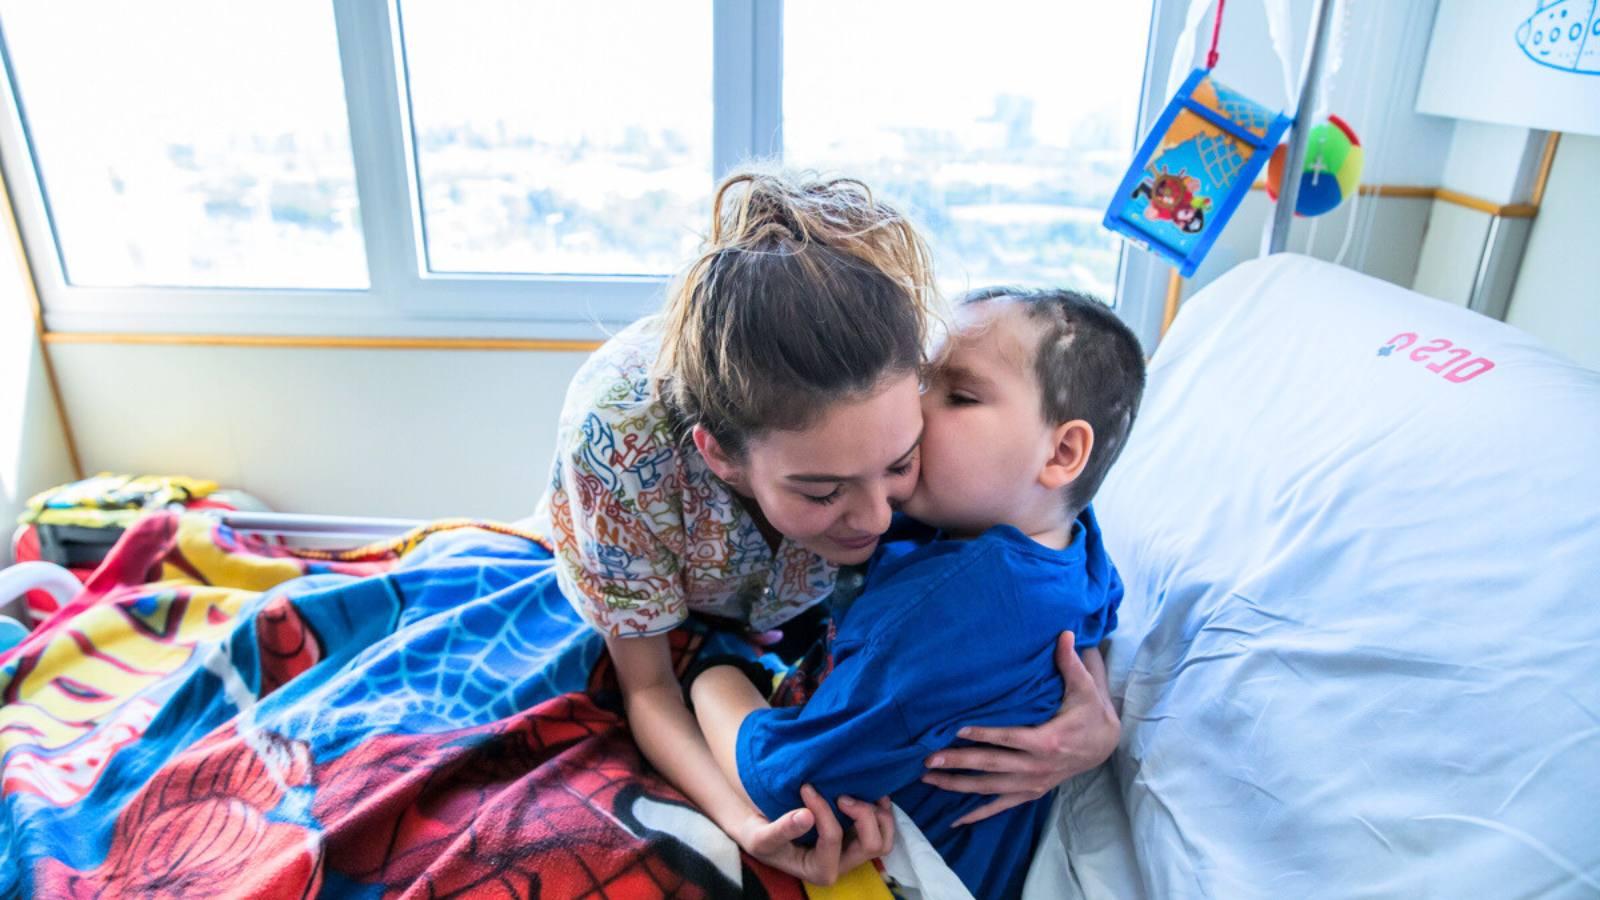 A patient of the SJD Barcelona Children's Hospital kisses the nurse who attends him